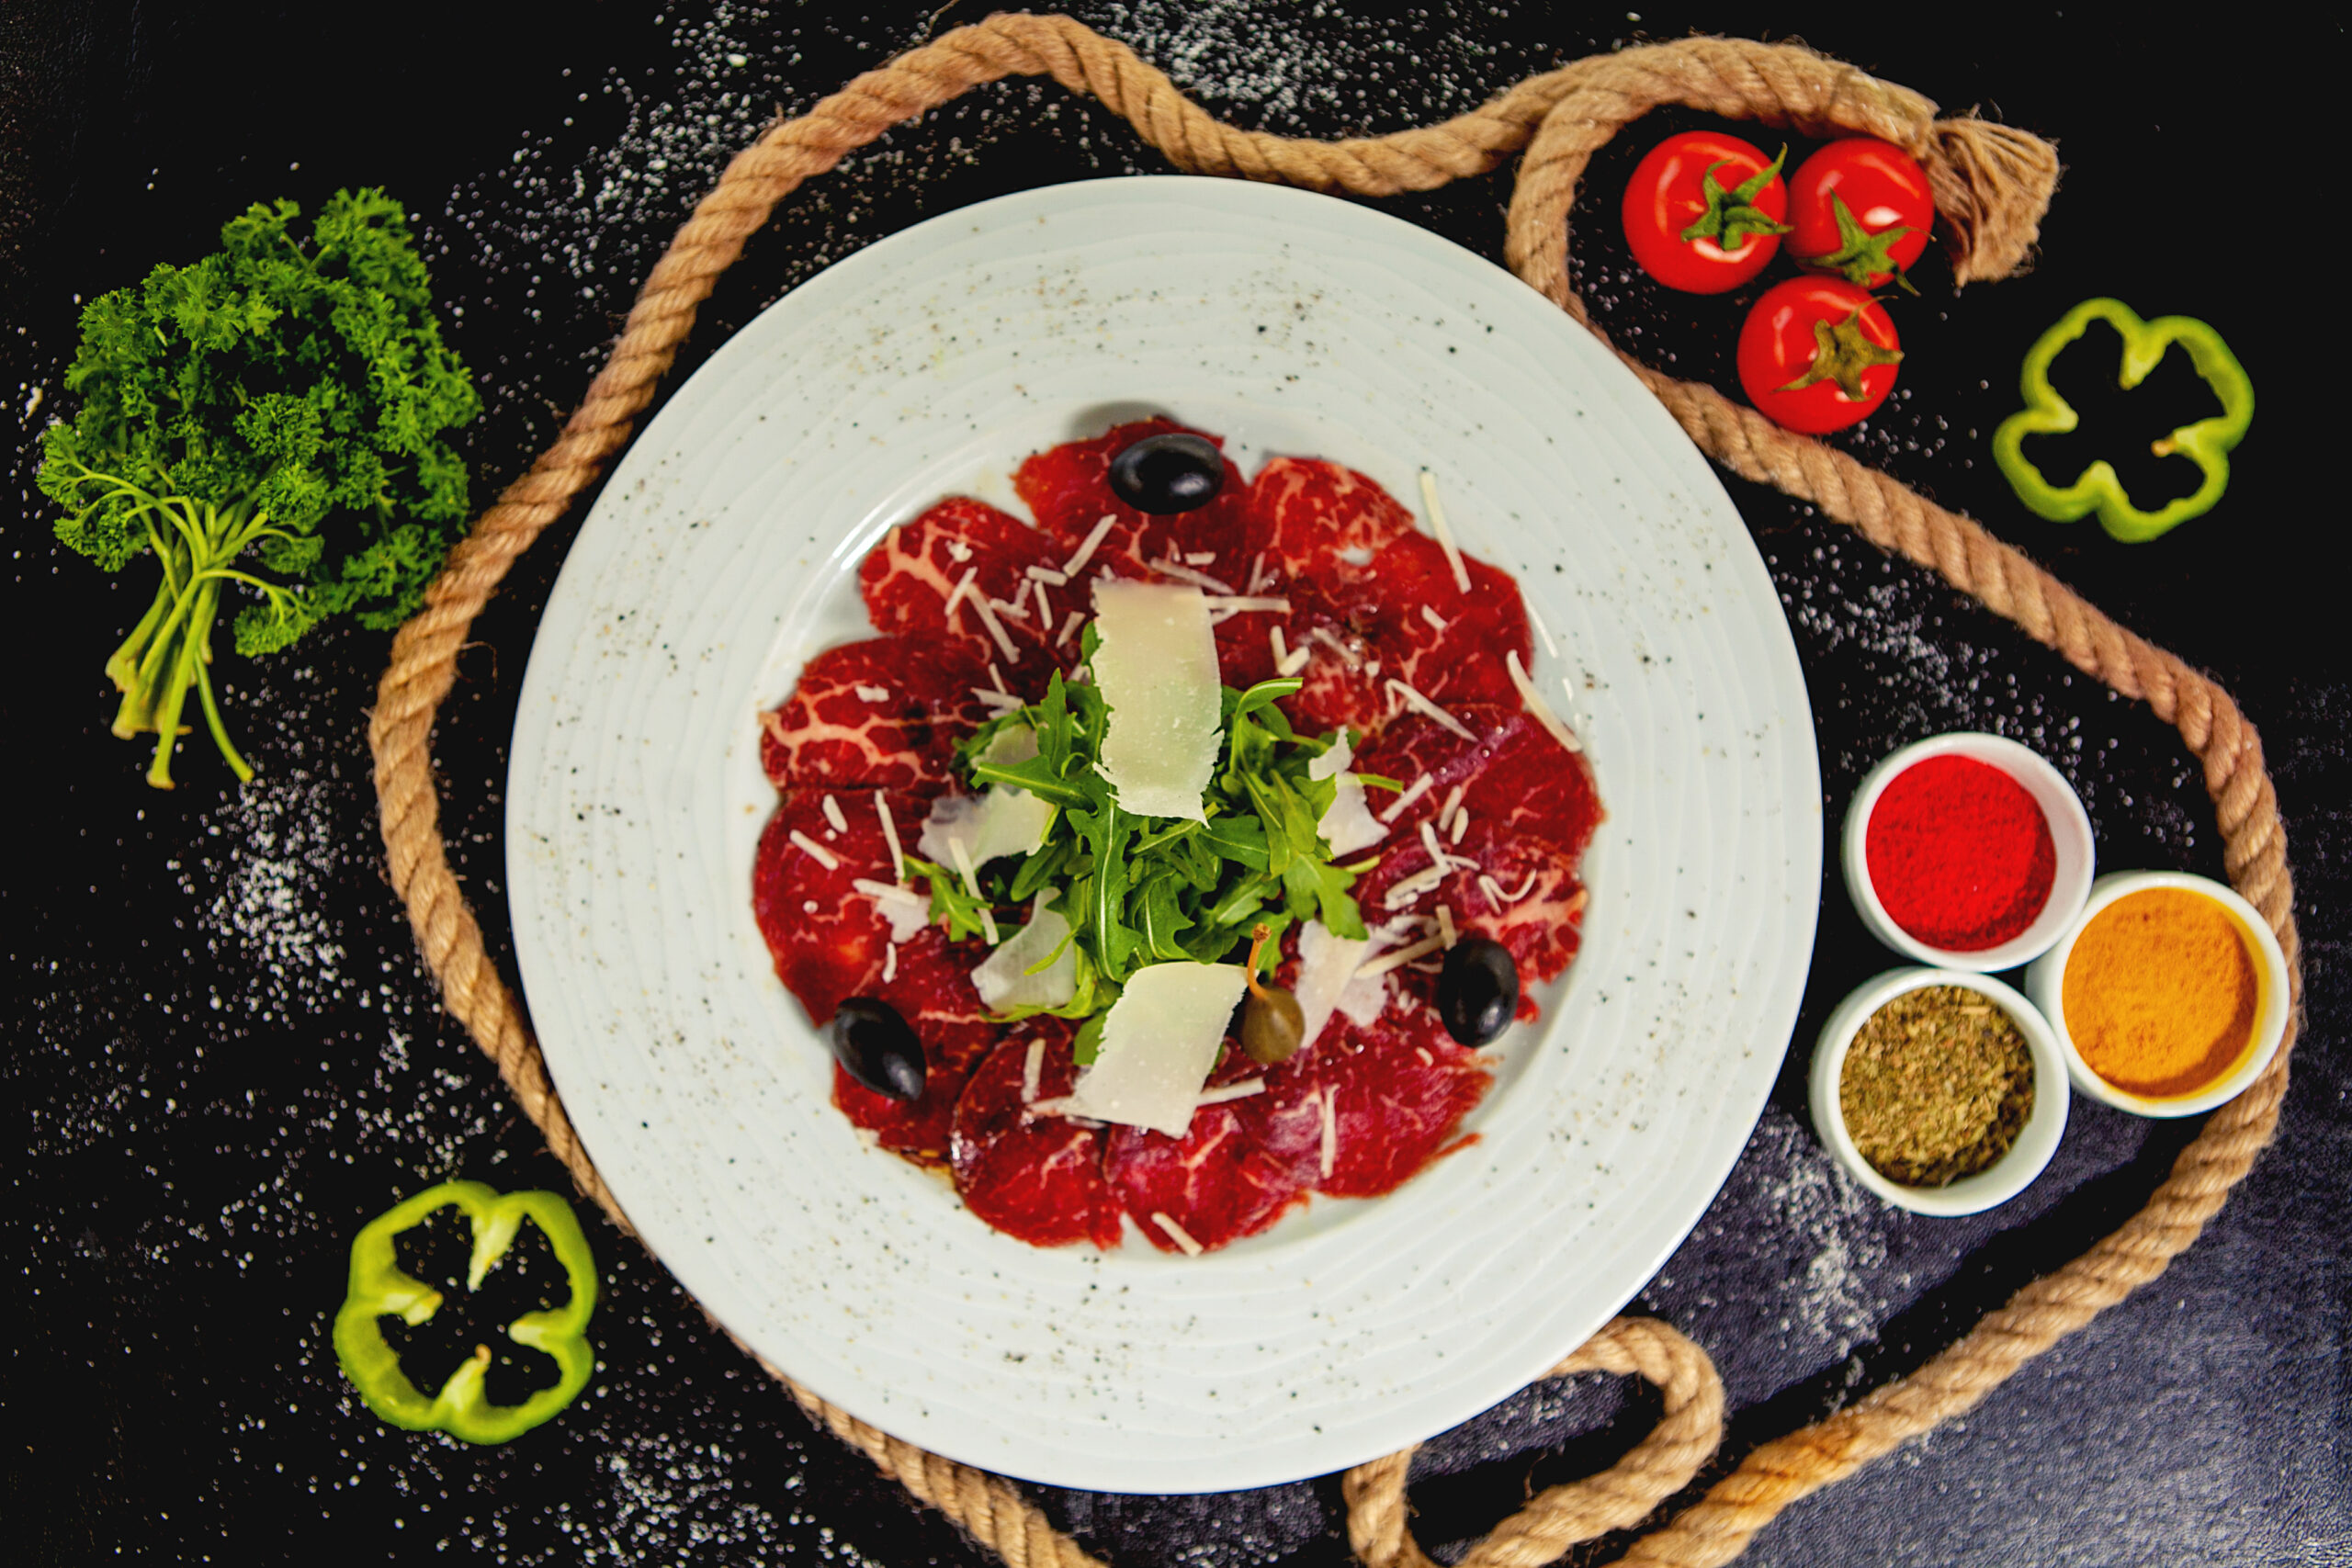 beef carpaccio with parmesan, arugula and olives